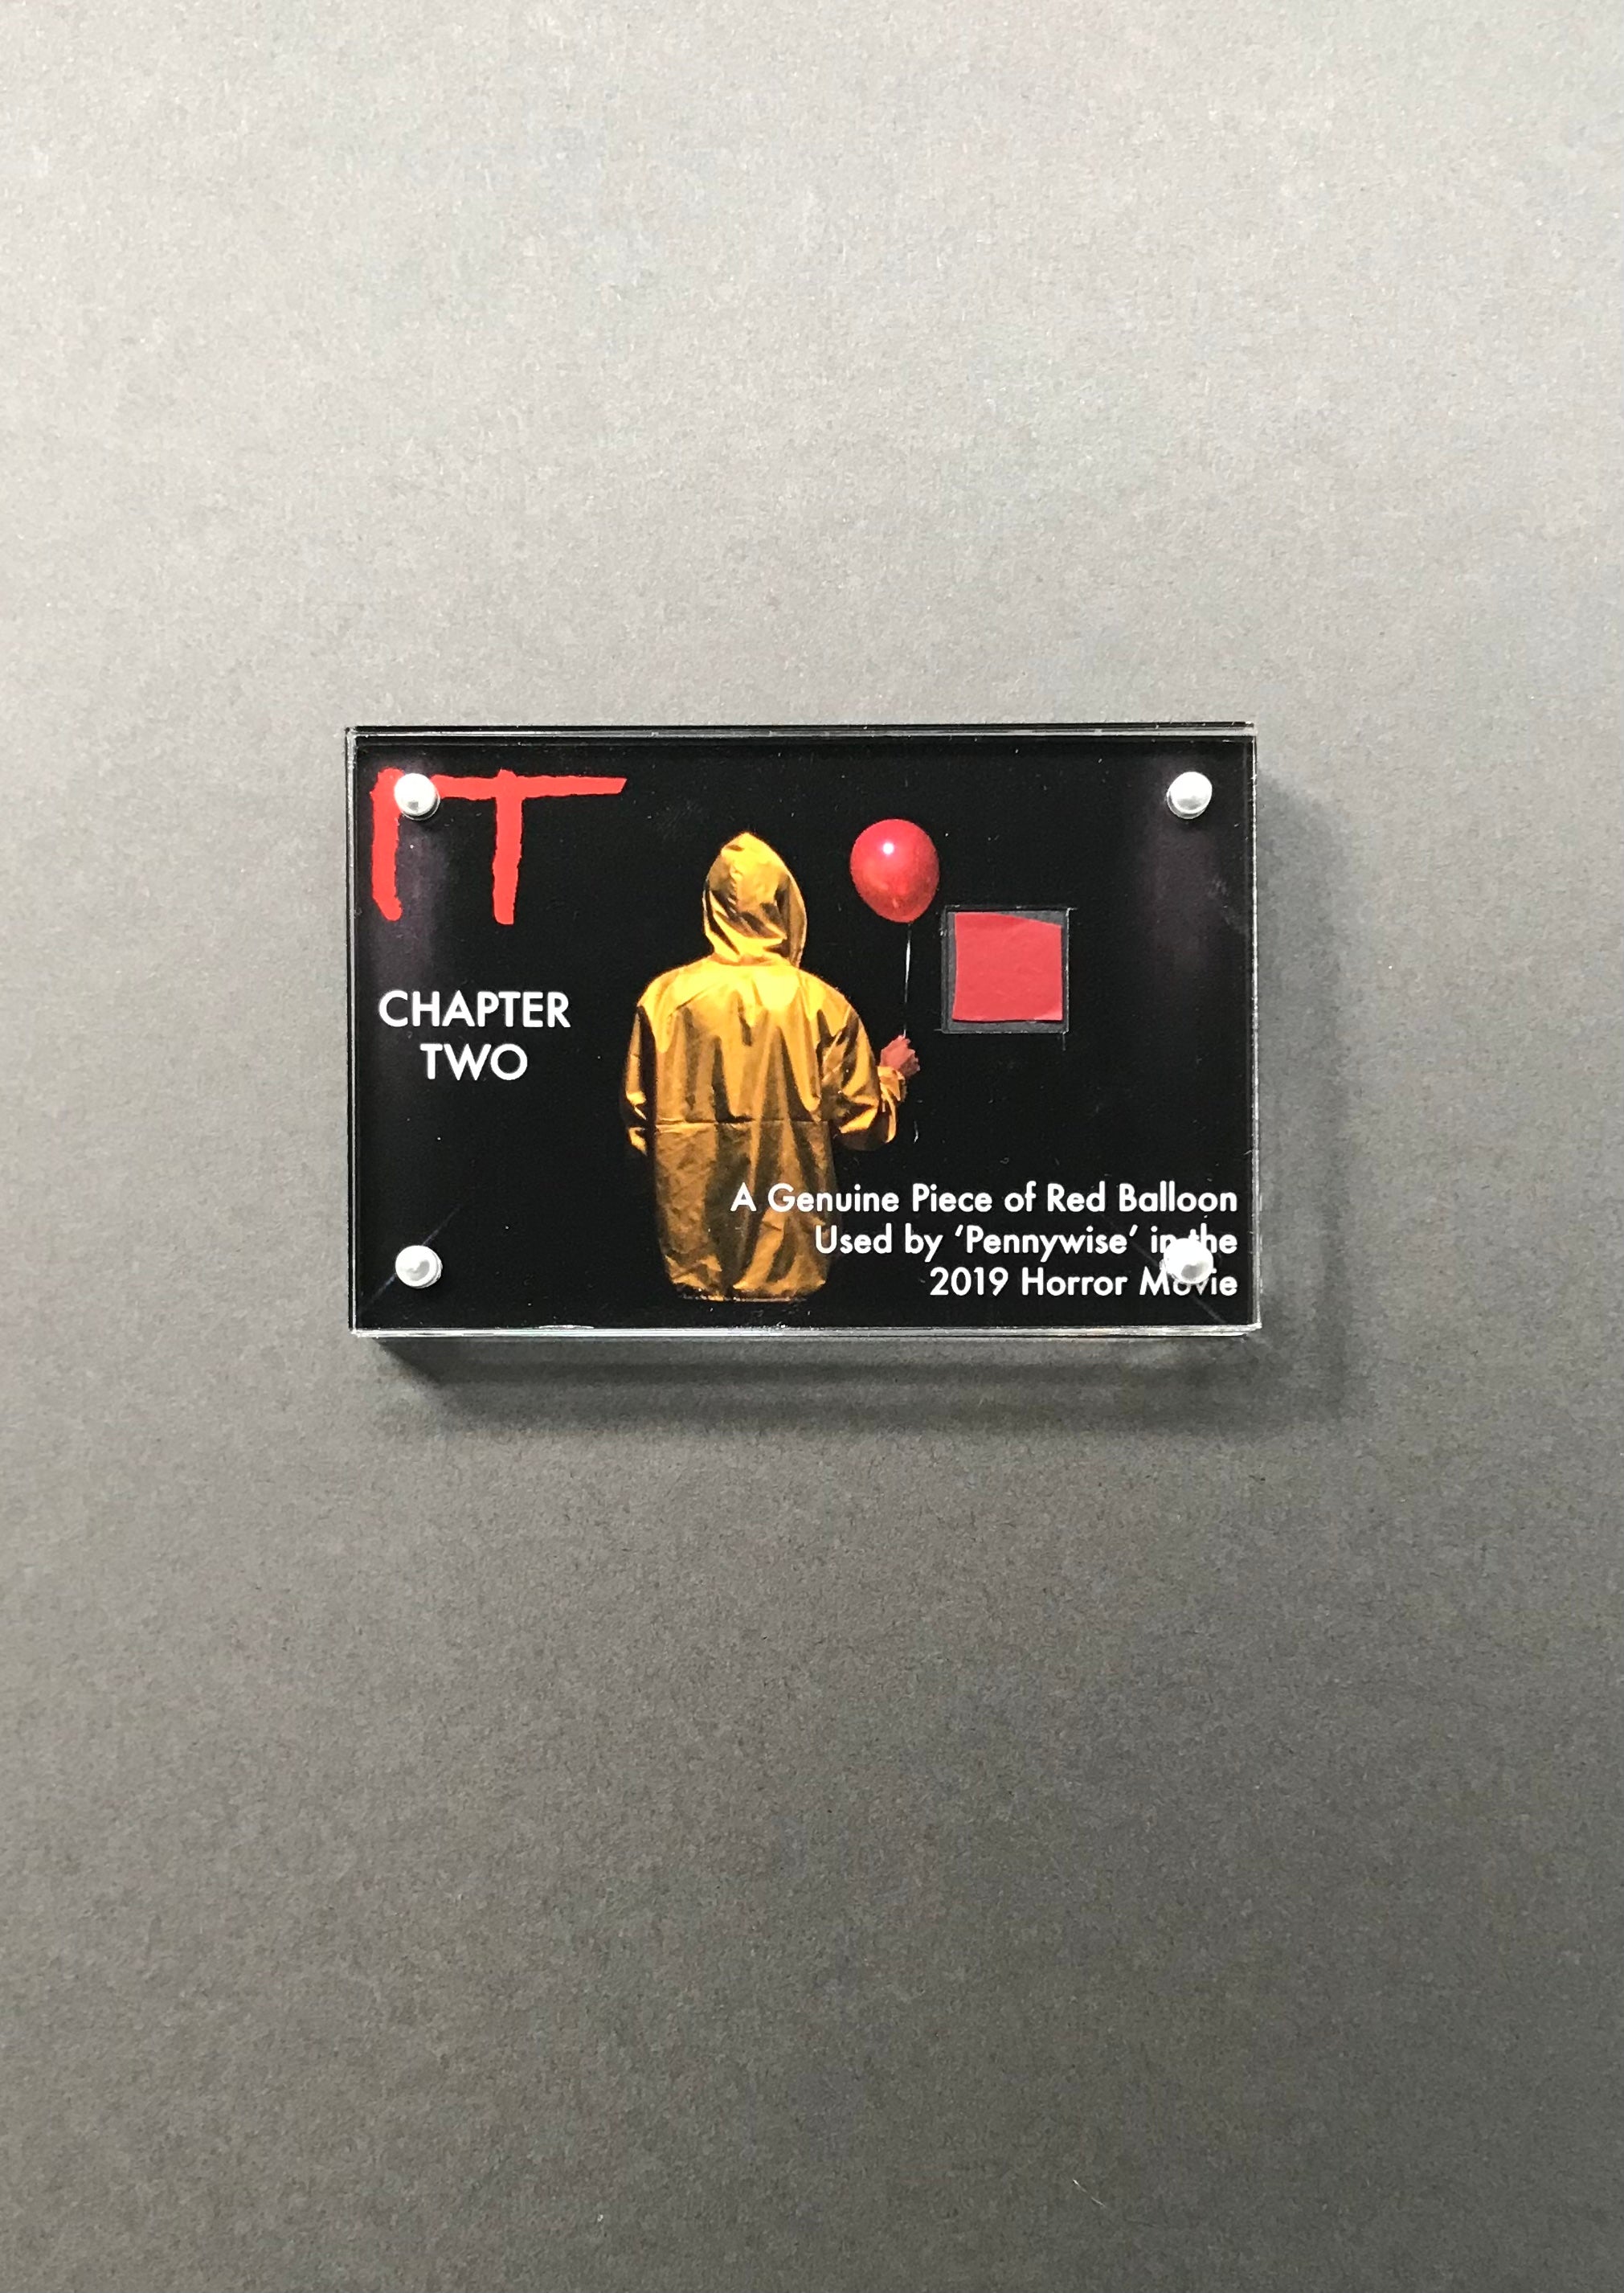 IT Chapter Two (2019) - A Miniature Display containing a piece of Pennywise Balloon